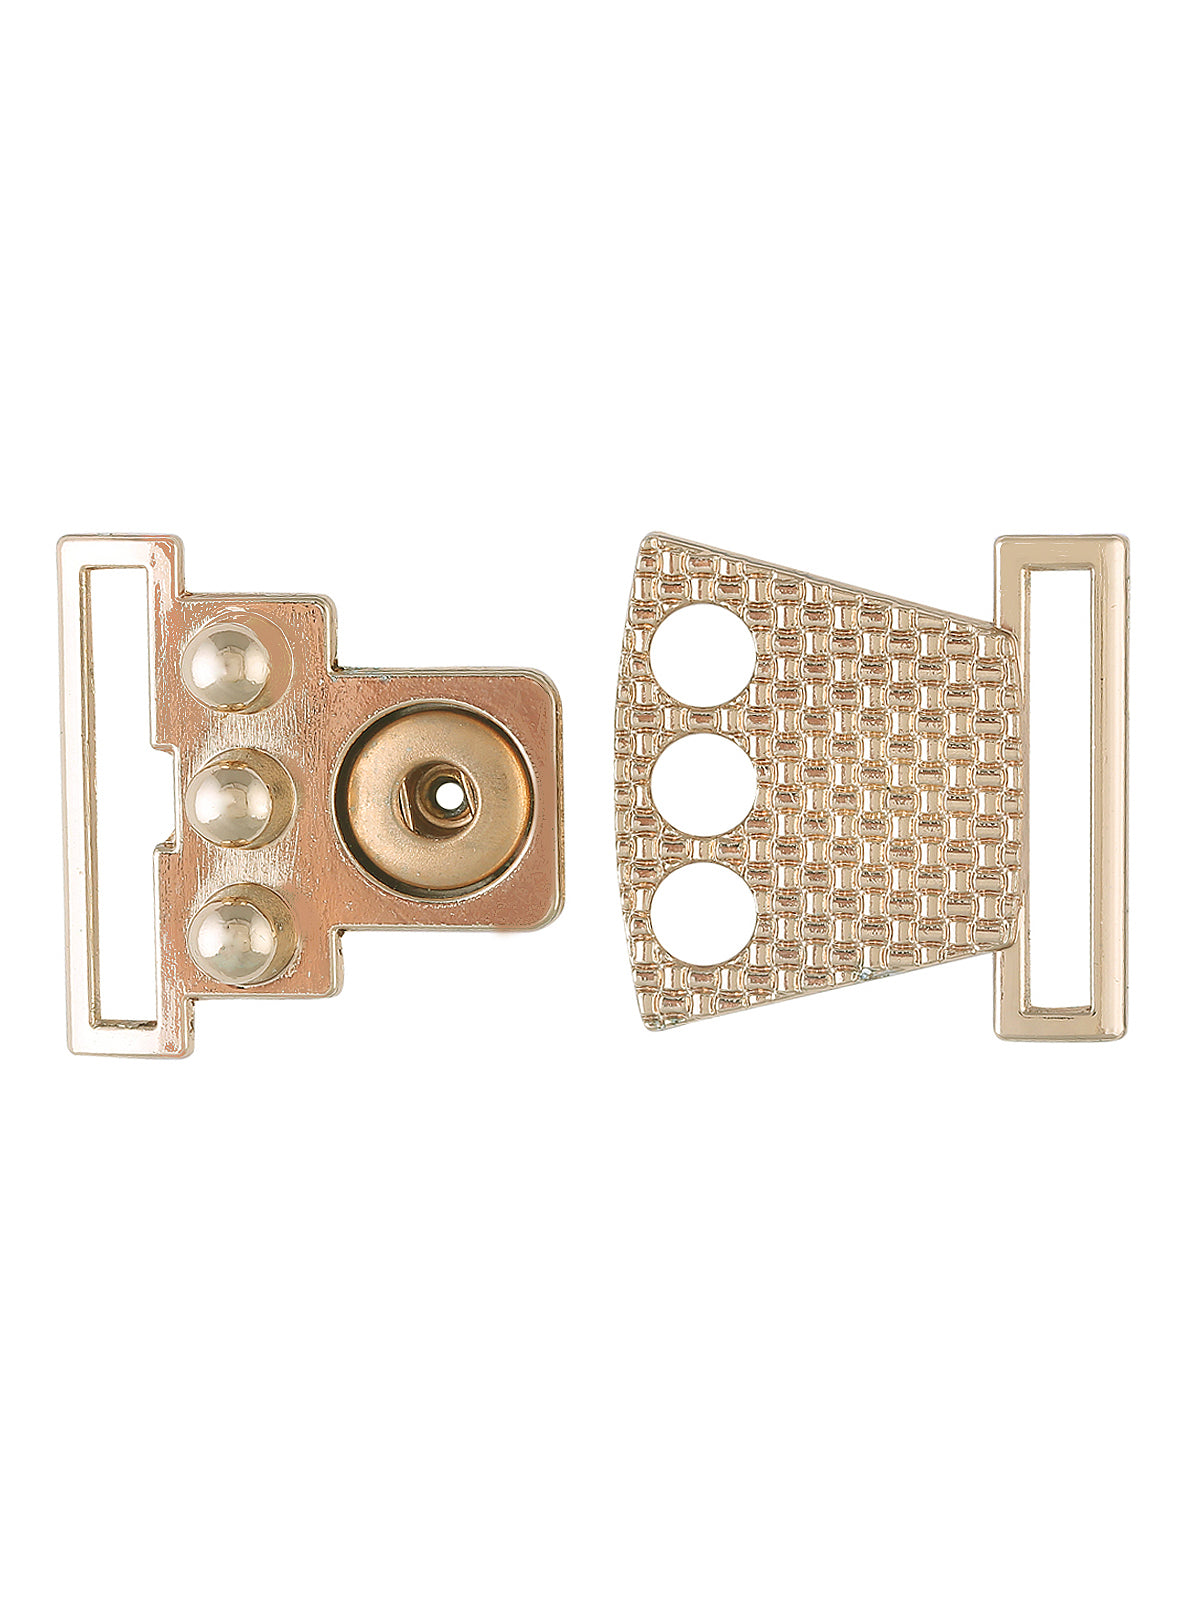 2 Part Closure Clasp Buckle With Snap Press